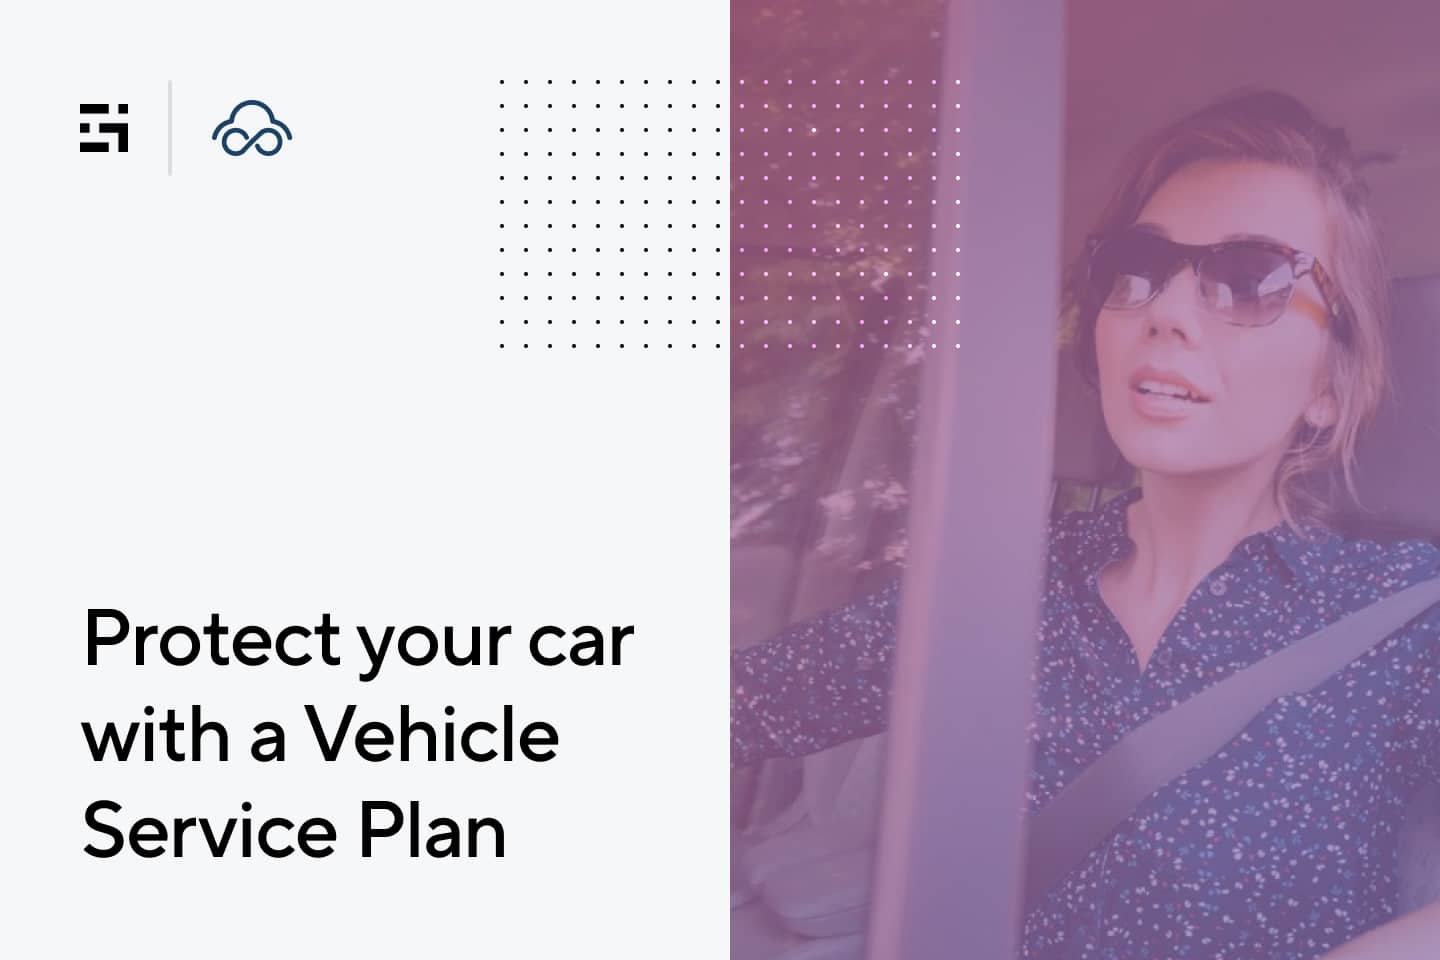 Protect your car with a Vehicle Service Plan